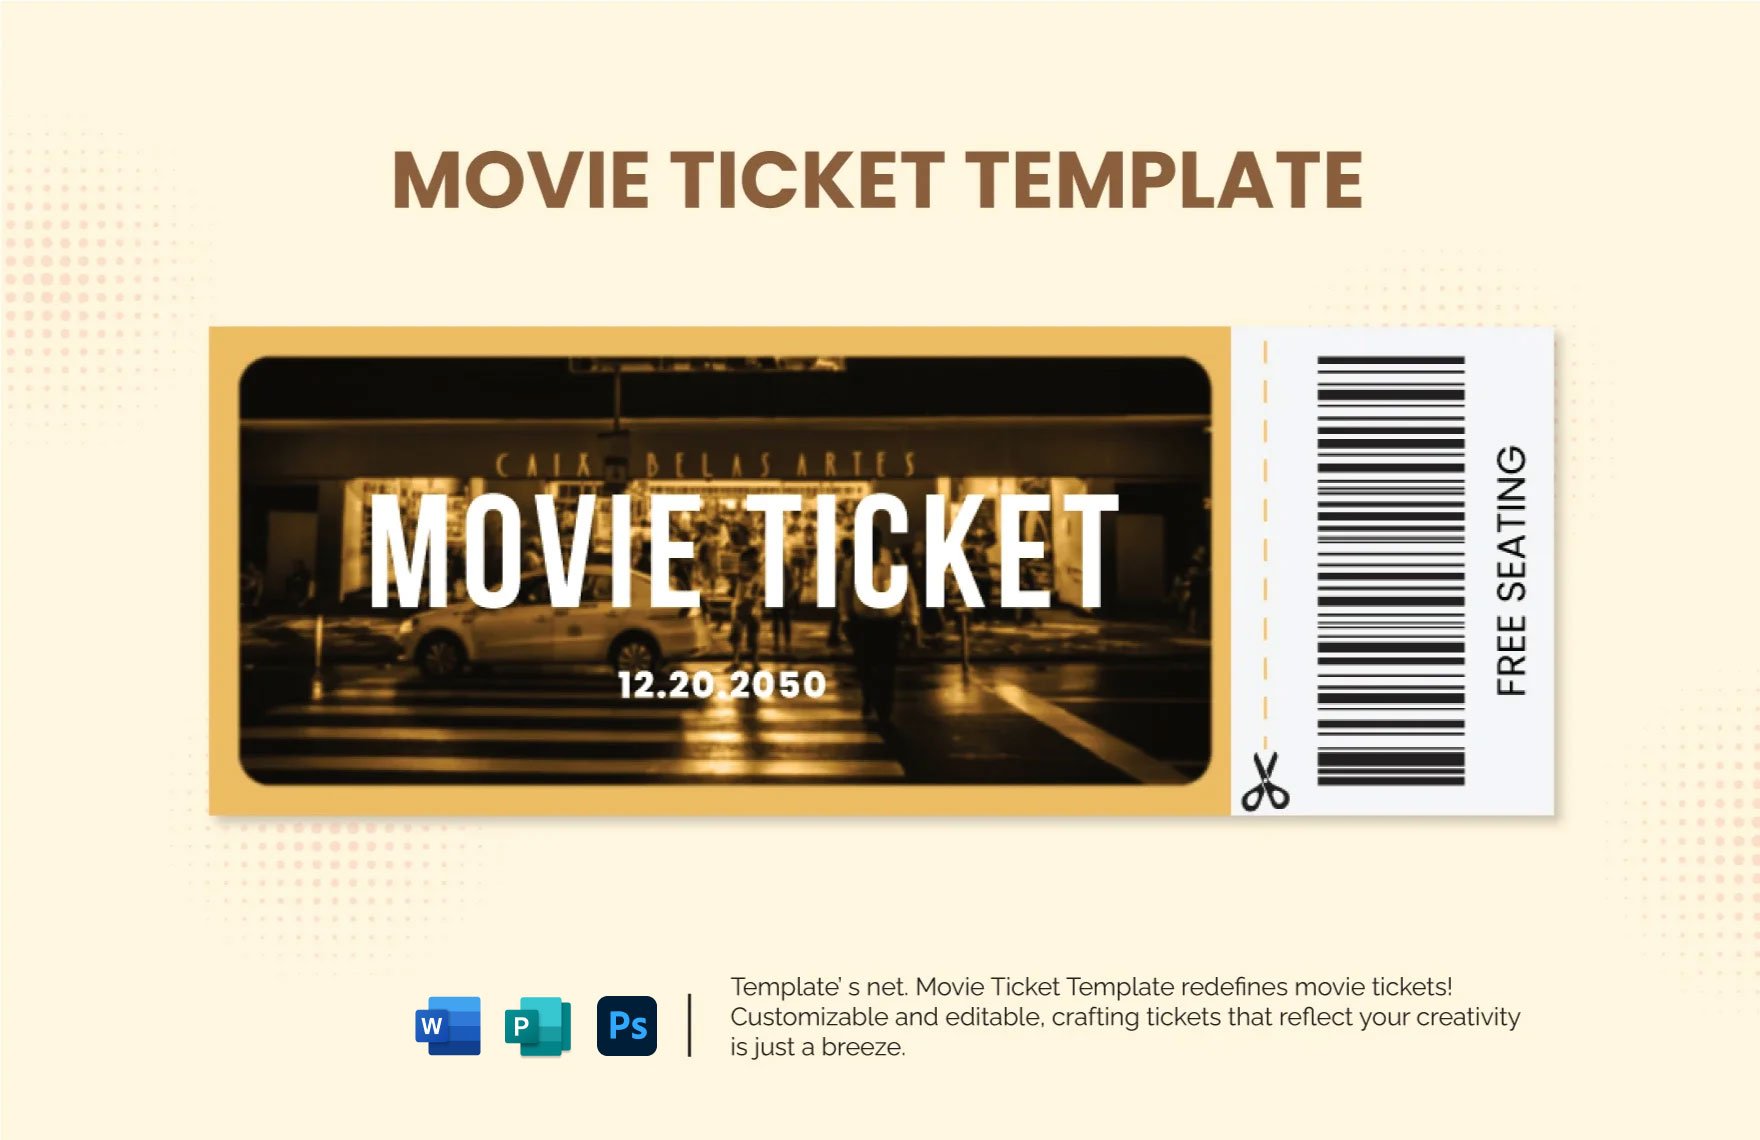 Movie Ticket Template in Word, PSD, Apple Pages, Publisher